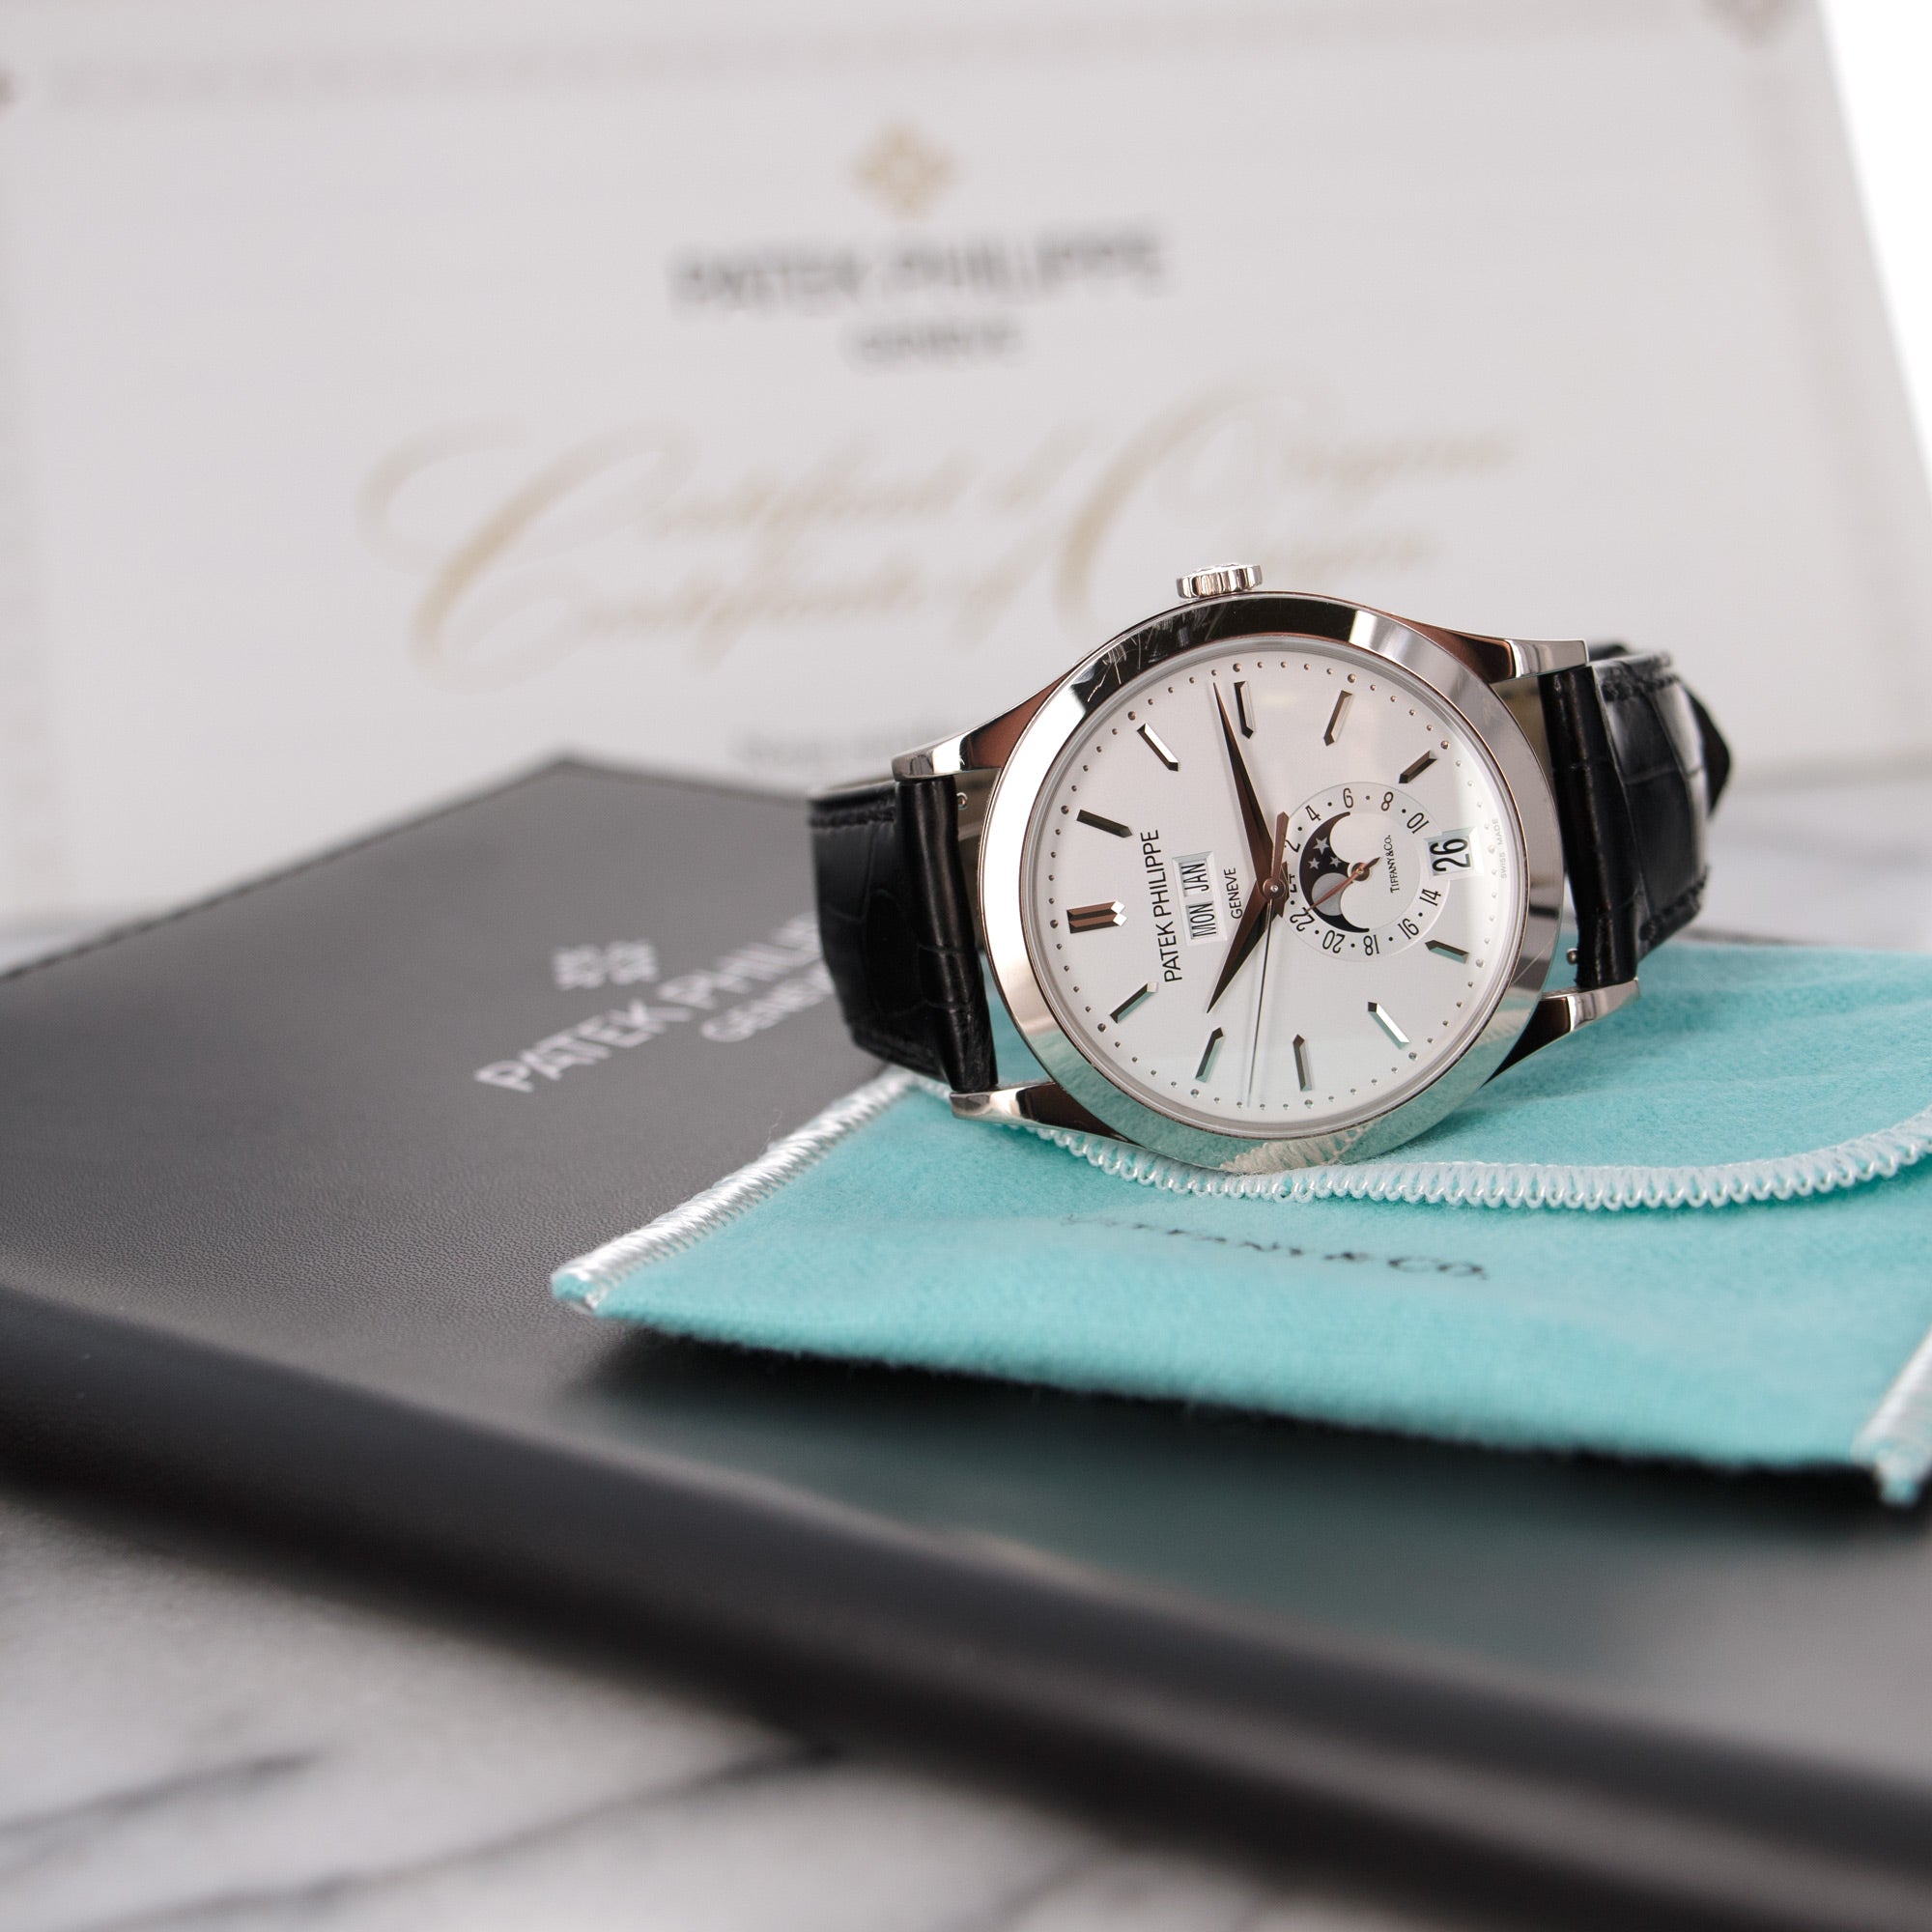 Patek Philippe White Gold Annual Calendar Watch, Ref. 5396. Retailed by Tiffany &amp; Co.